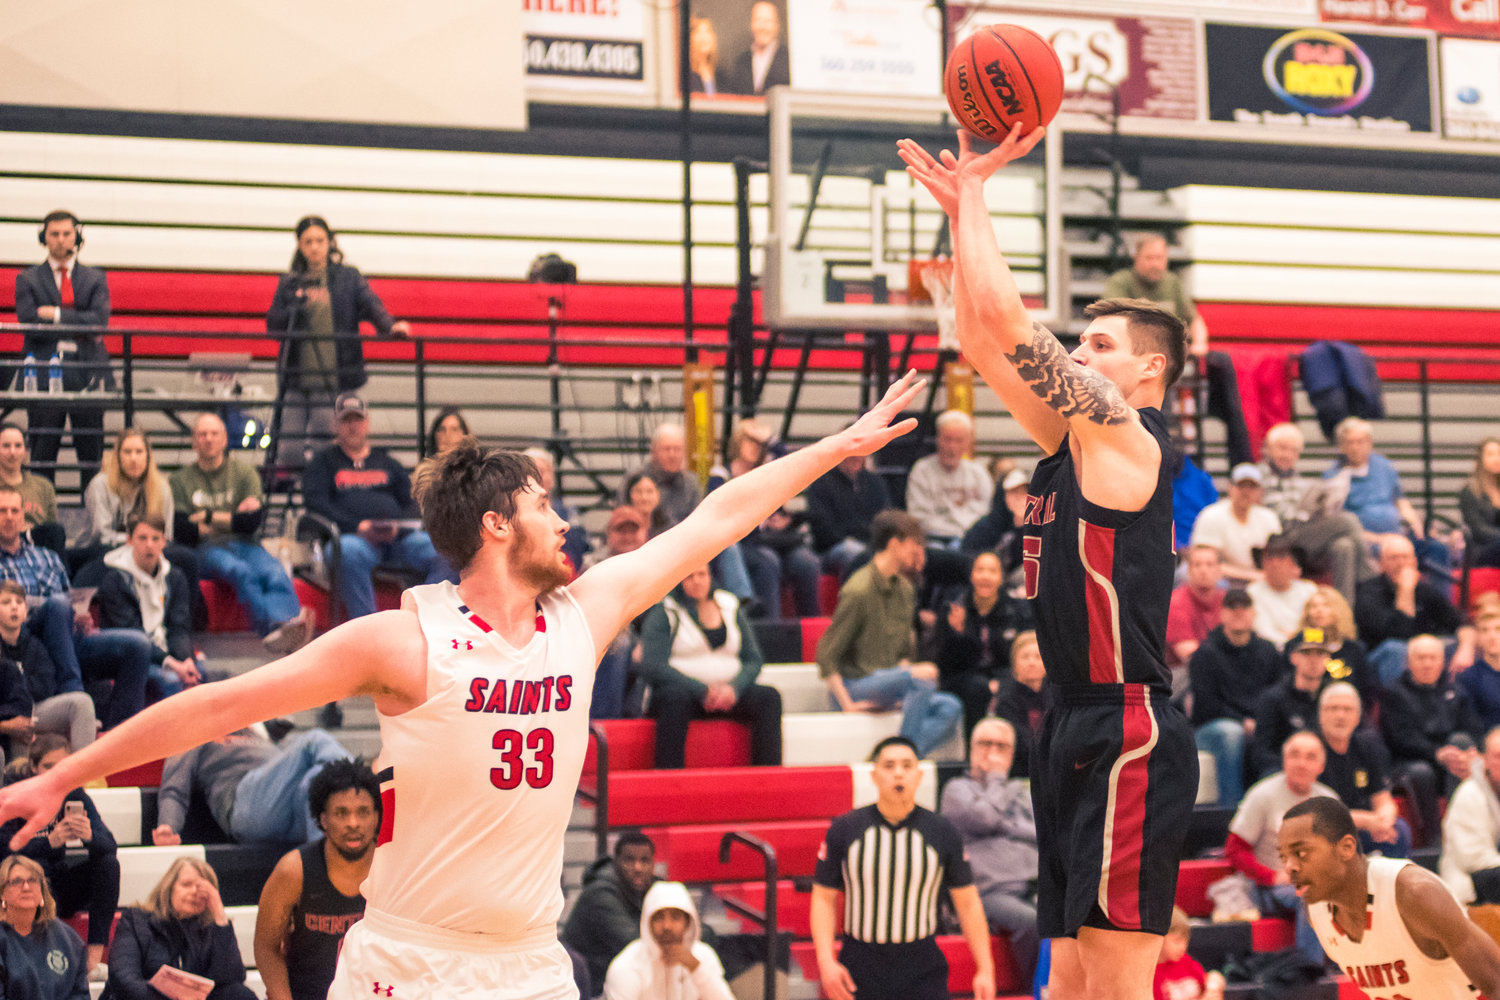 Central's Matt Poquette (25) goes up for a shot during a game at Saint Martin's University.